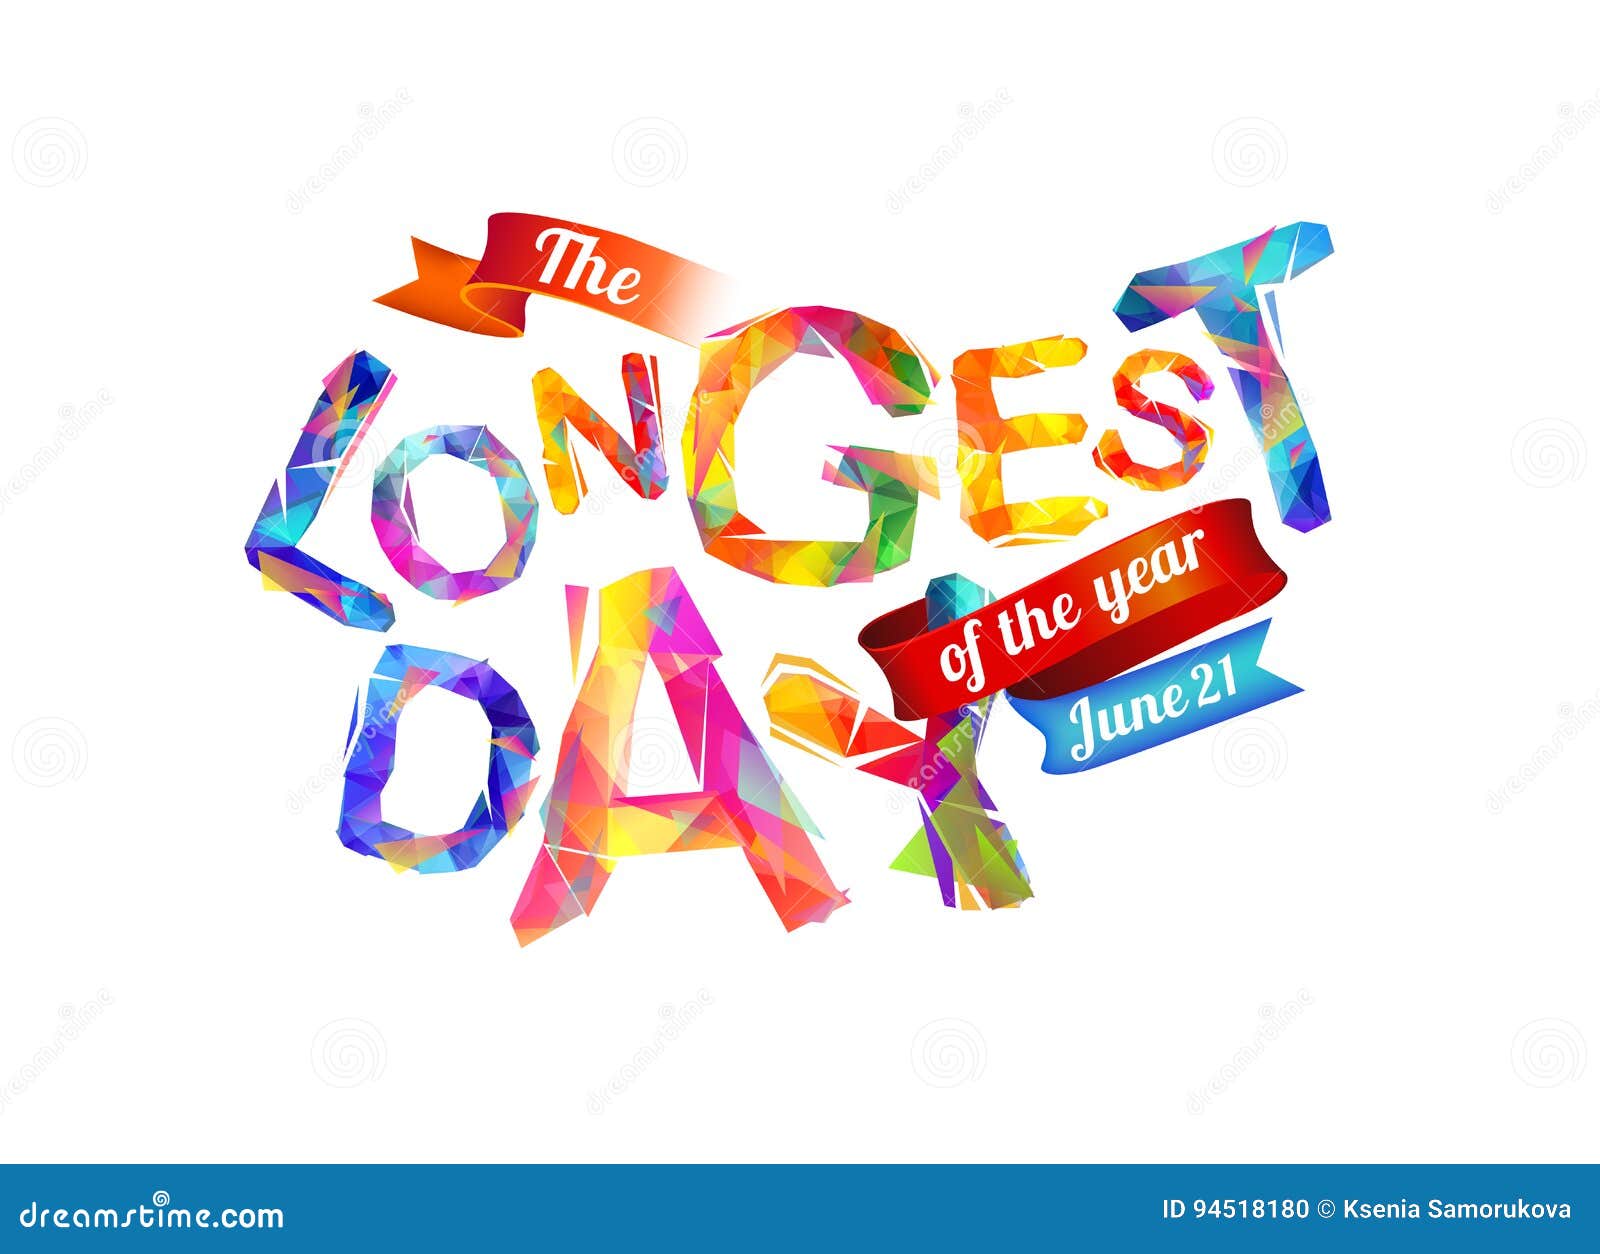 The Longest Day June 21 Stock Vector Illustration Of Solstice 94518180